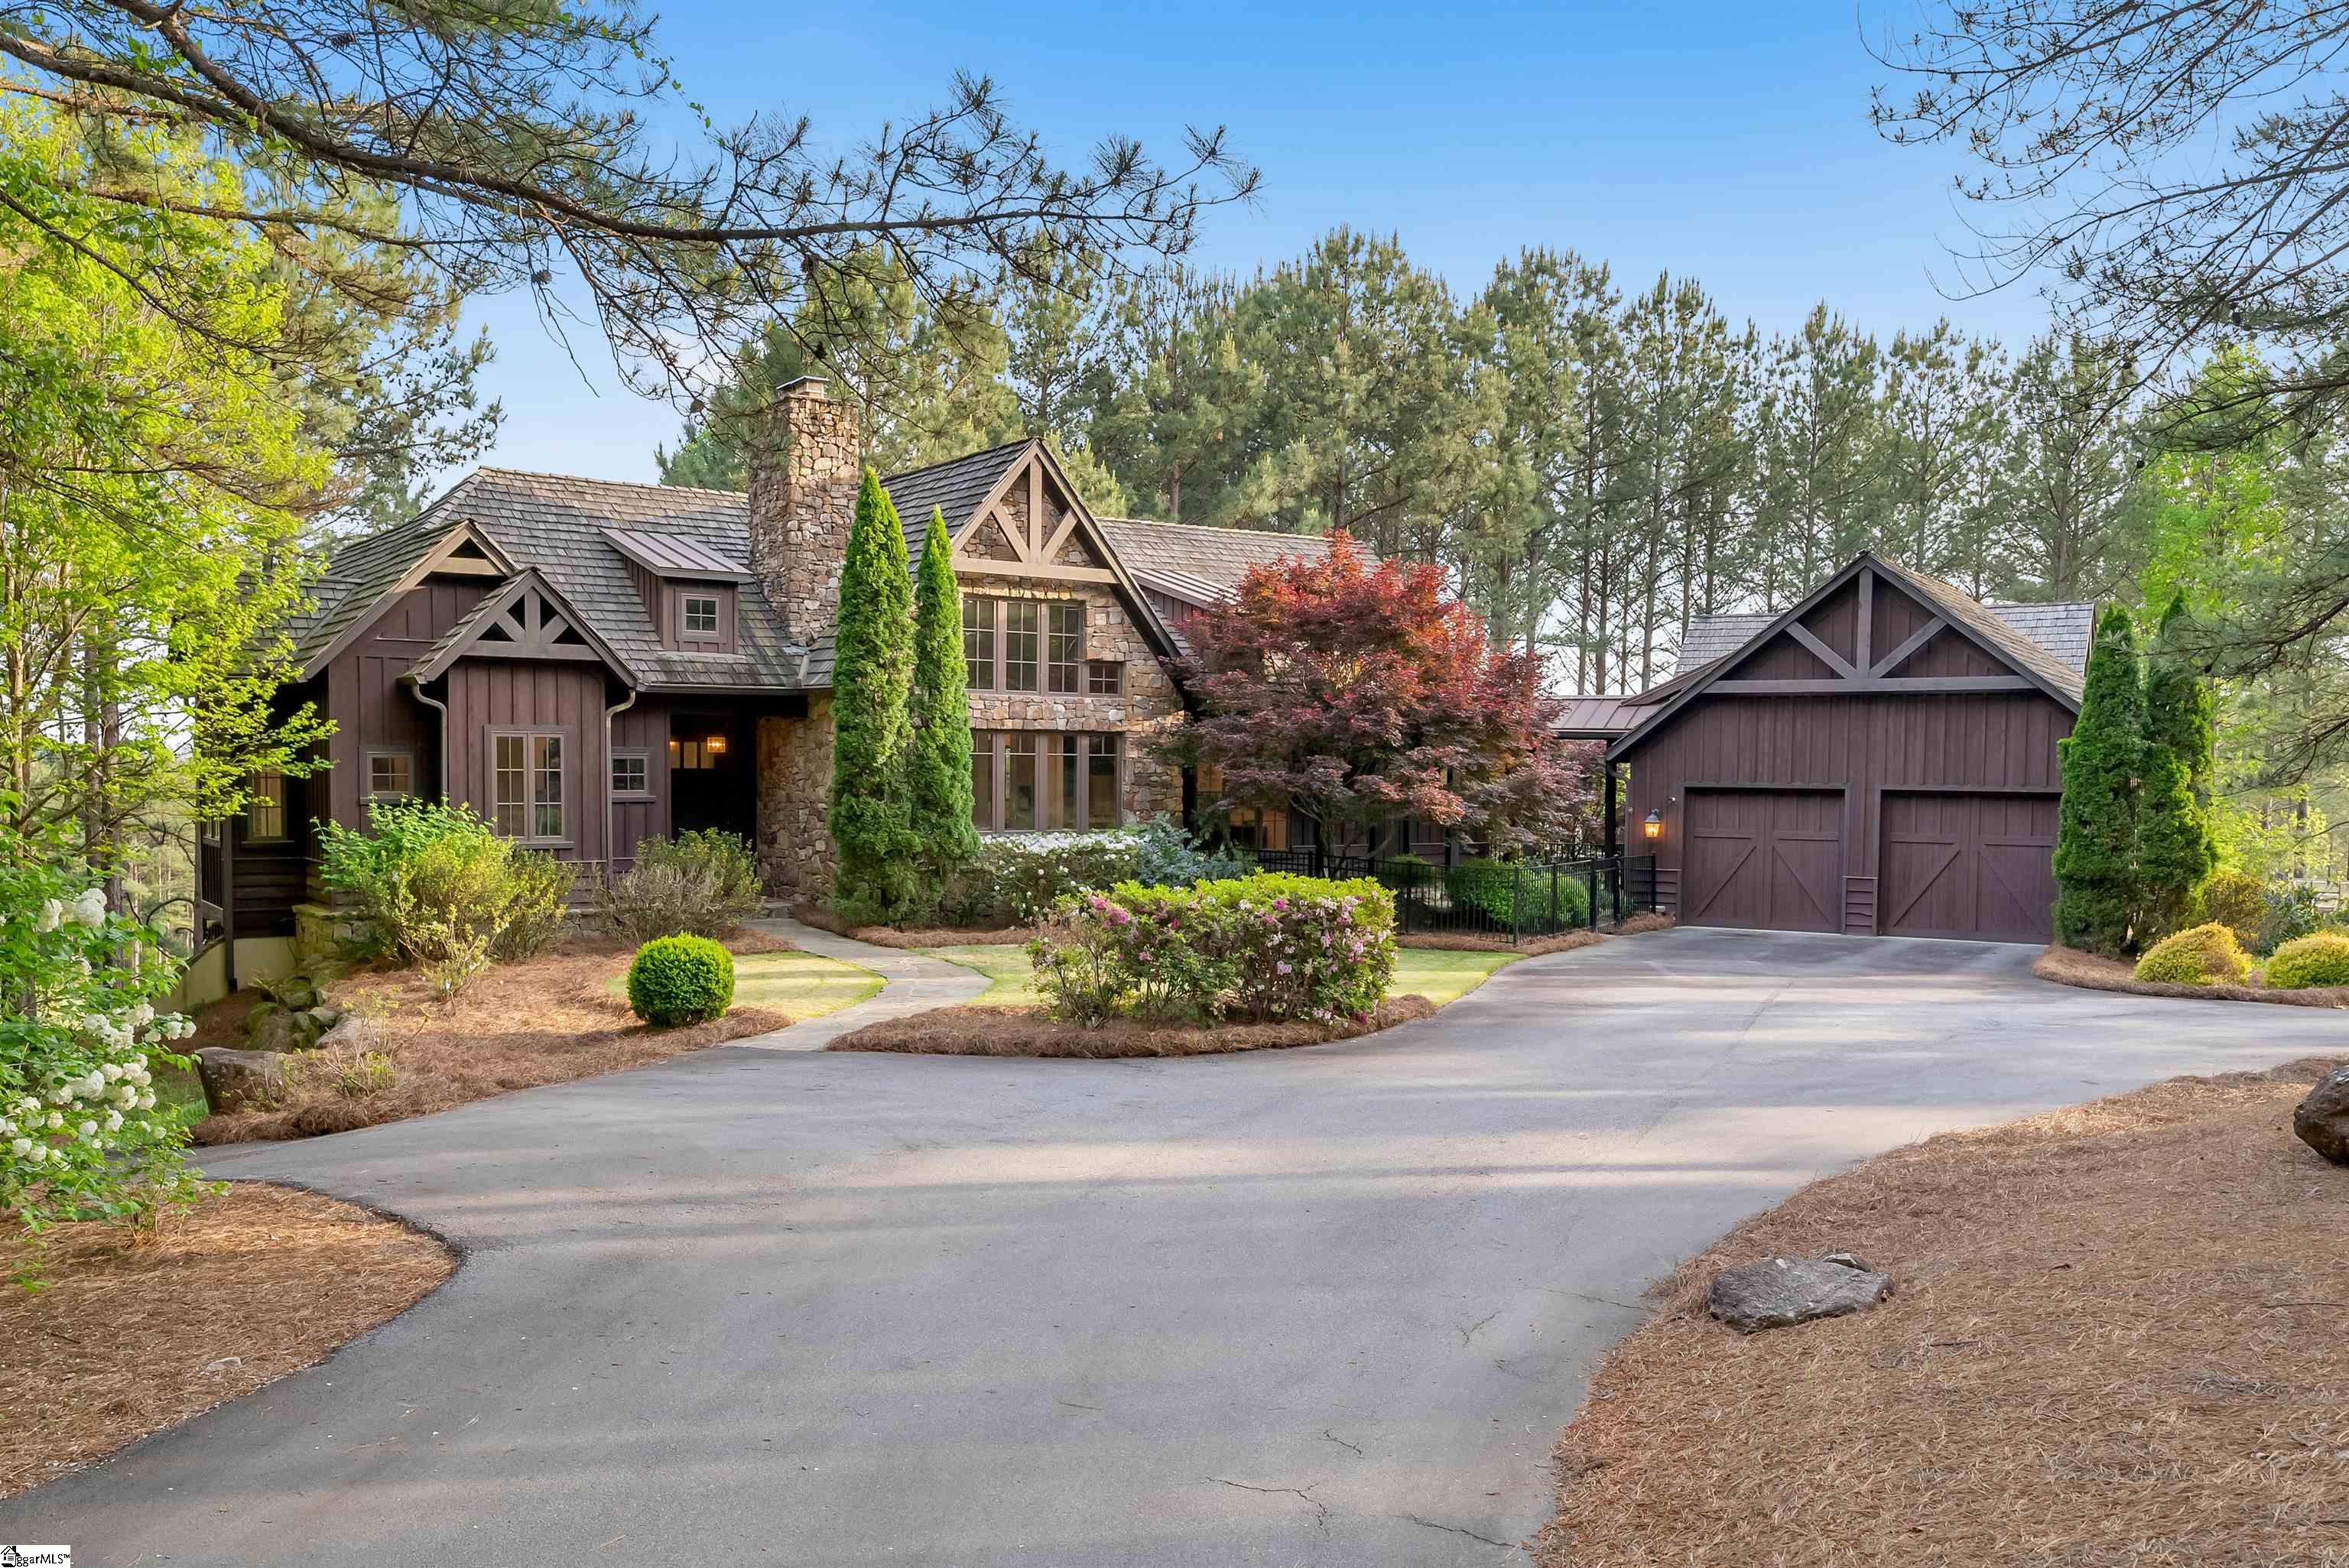 DELIGHTFULLY REIMAGINED & IMPECCABLY FURNISHED! This turn-key home is nestled on a beautiful 2.84-acre lot overlooking the 6th green of The Reserve at Lake Keowee’s Jack Nicklaus signature golf course. In addition to the main house, there is a spacious guest house…a compound that is truly one of a kind. AND it is move in ready and totally furnished! It features over $600K in upgrades - completely remodeled since 2020. 355 Keowee is in an ideal location in The Reserve: not only is it a short golf cart ride to The Reserve’s village, but it's also a quick trip by car out RLK's Keowee gate for easy access to Clemson.  This stunning retreat provides an optimum investment opportunity for family getaways or casual business retreats. This mountain contemporary home provides a comfortable escape for two, and will graciously expand to accommodate gatherings of twenty. There are 6 bedrooms (plus sleeping loft), 5 full/3 half baths, 3 living areas, 3 fireplaces, 5 porches. All living/entertainment rooms have fabulous views of the golf course and the surrounding hills. There are multiple master suites, two kitchens, plus numerous indoor and outdoor living areas. A spectacular game room with bar is perfect for a variety of festive gatherings, whether it’s game night, college football watch party, or Sunday at the Masters! Or just turn on your playlist music with the entertainment system – now that’s a party!  Here are a few additions that could seal the deal: Wolf professional range in main kitchen, main house porch with retractable screens, bunkroom that sleeps 6, a whole house generator (main house), golf cart and storage room, Redline garage storage cabinet system, a large fenced dog yard, two Control 4 entertainment systems, multiple large-screen televisions, an AOG gas grill and a Traeger smoker.   Are you hoping to enjoy a Lake Keowee area home ASAP? Or perhaps a lot owner with sticker shock with quotes for a custom-built home? OR looking at homes that need renovation to suit your needs? Rest assured that this home is ready for you, your family & guests for summer 2024!   All RLK homes are eligible for the club rental program; this home would be perfect. Call listing agent for details. RLK Premier membership is required. $72,000 membership fee is not included; Buyer to pay at closing.